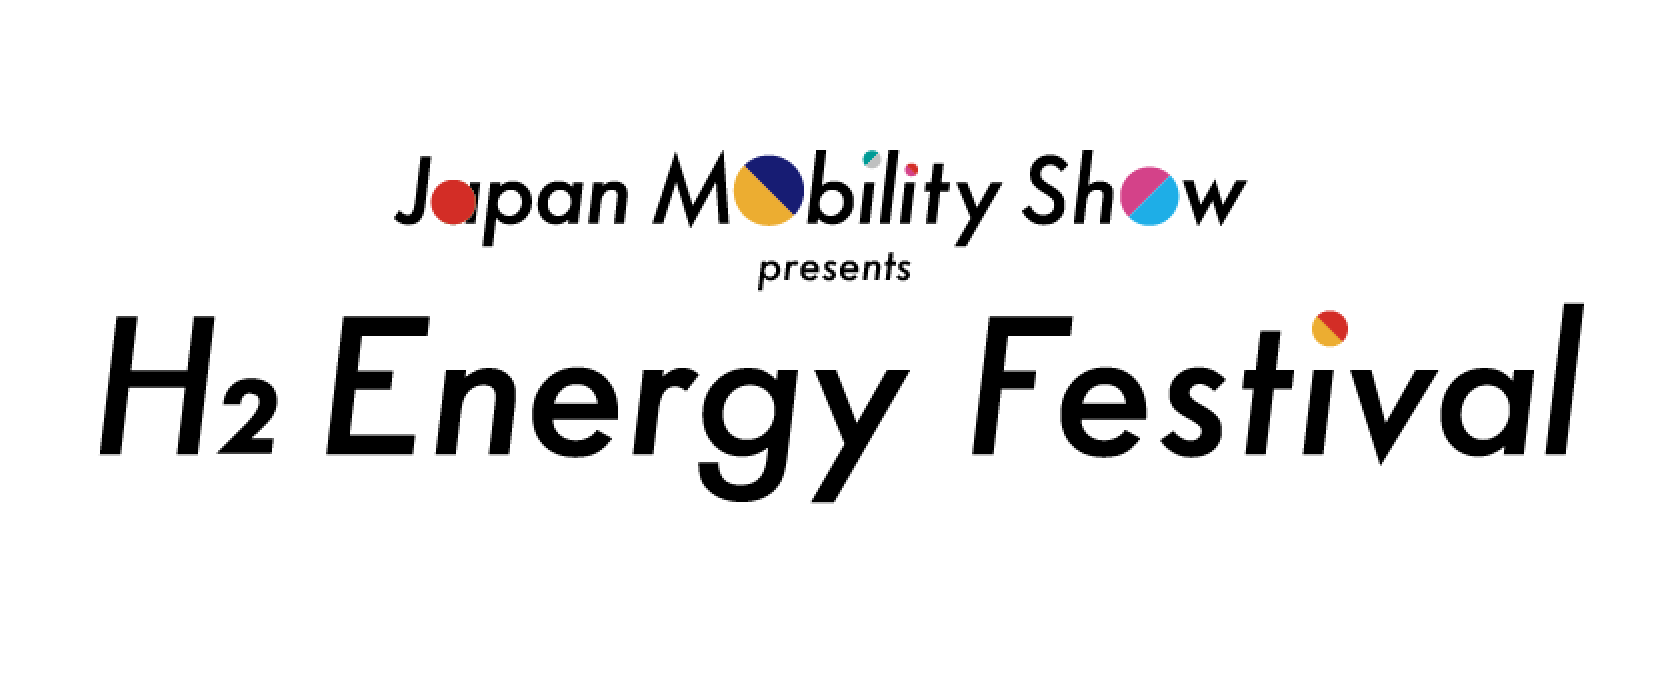 「Japan Mobility Show presents H2 Energy Festival」への出演が決定！